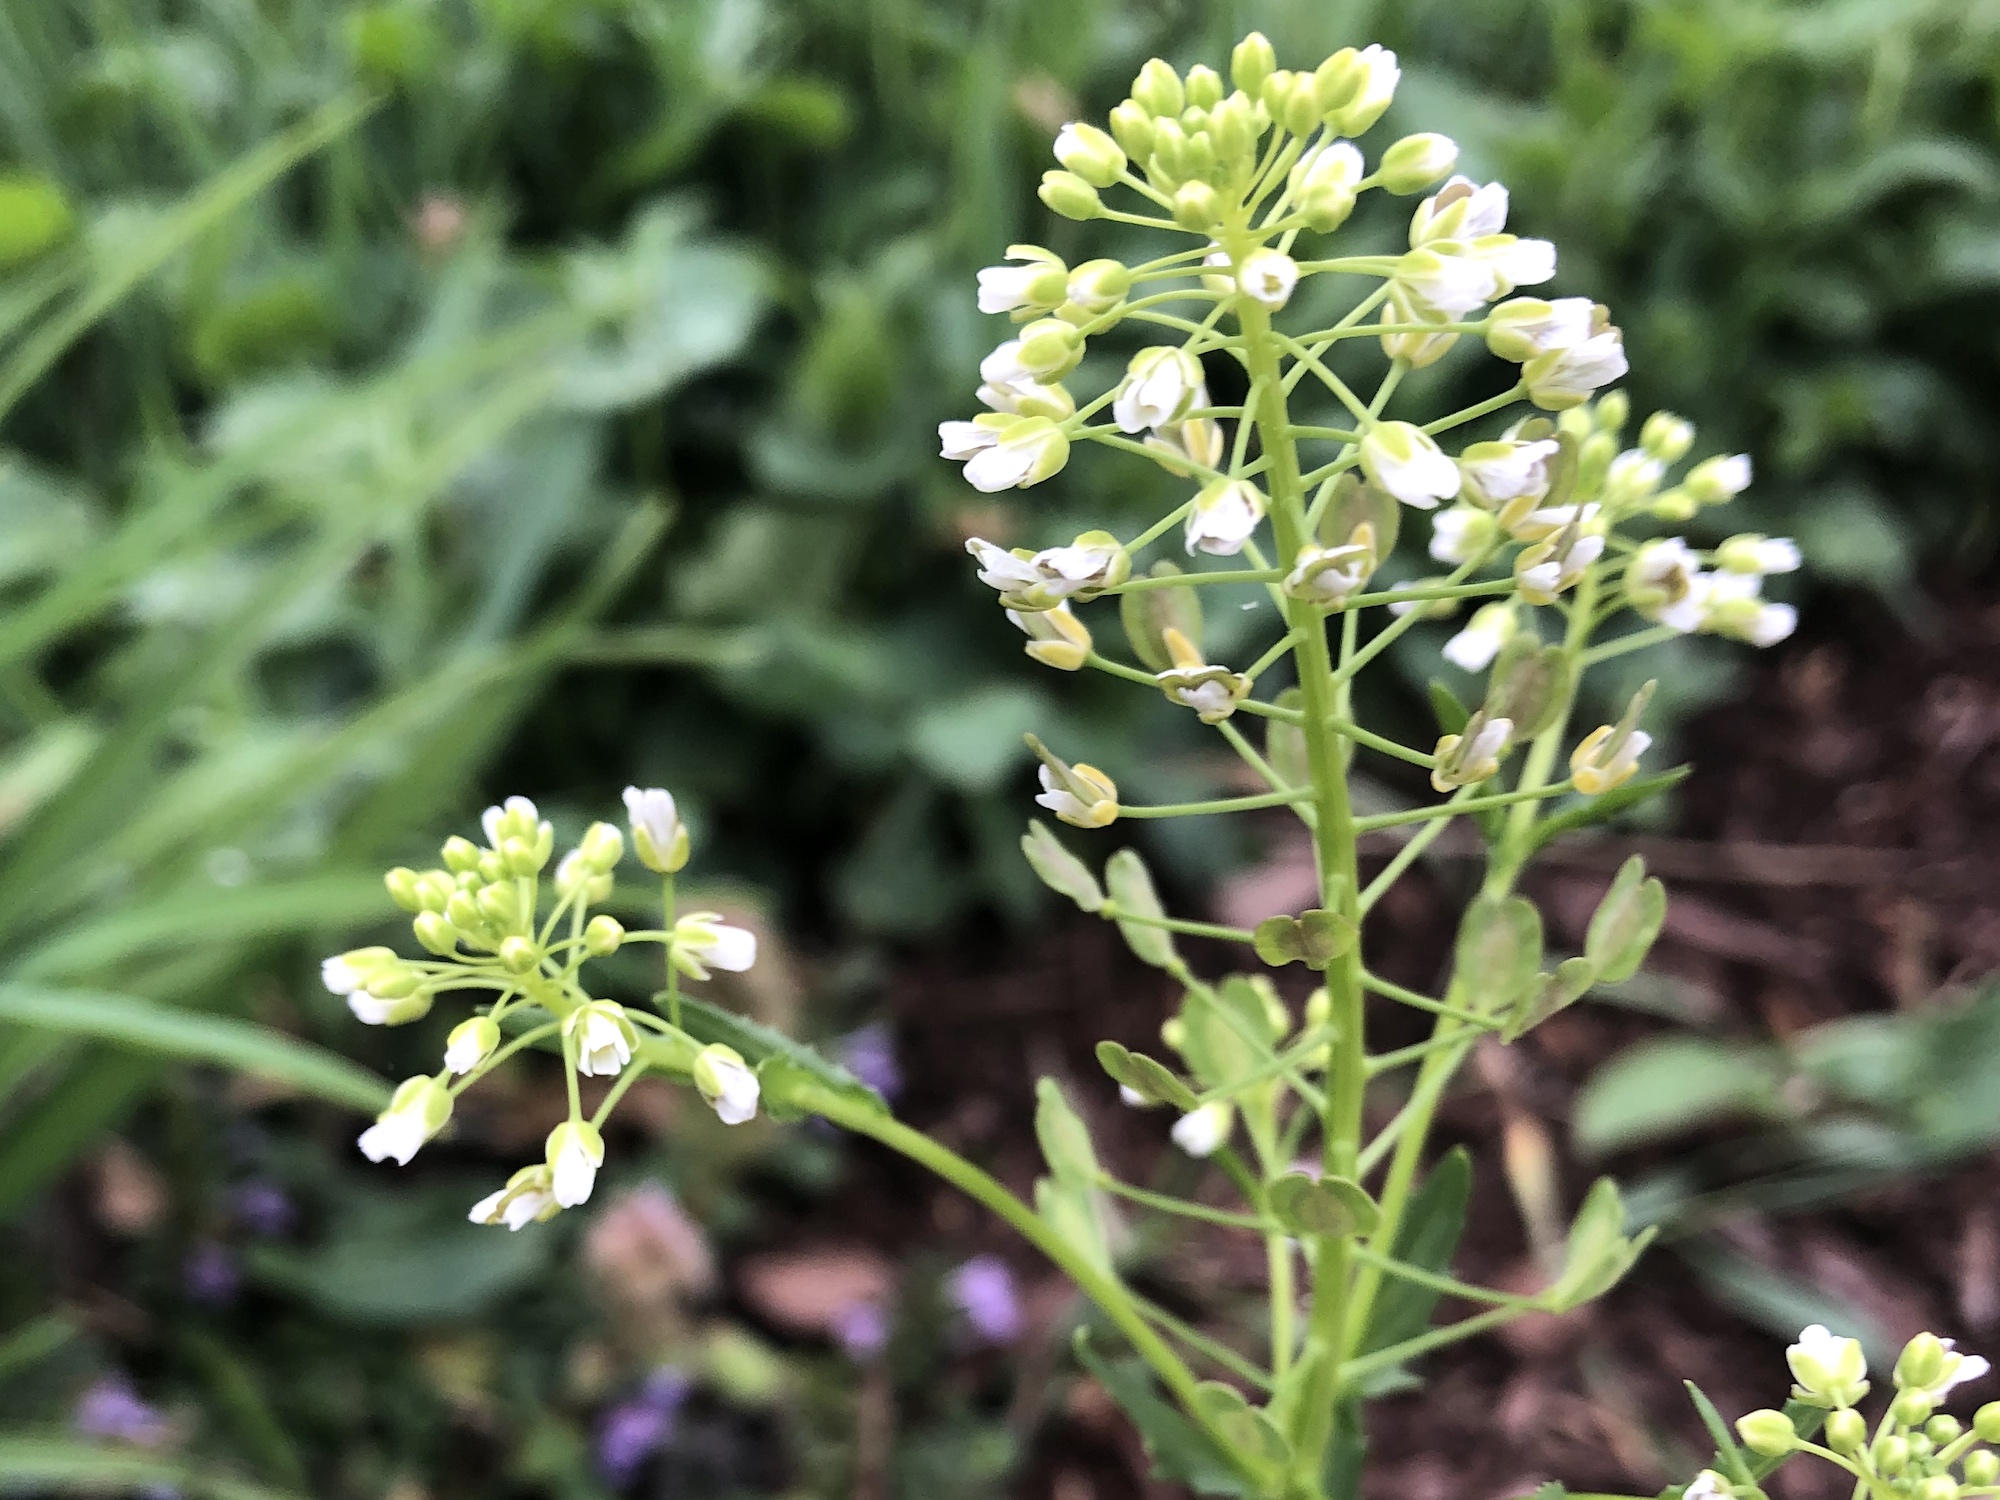 Field Pennycress flowers near retaining pond on corner of Manitou Way and Nakoma Road in Madison, Wisconsin on May 4, 2021.